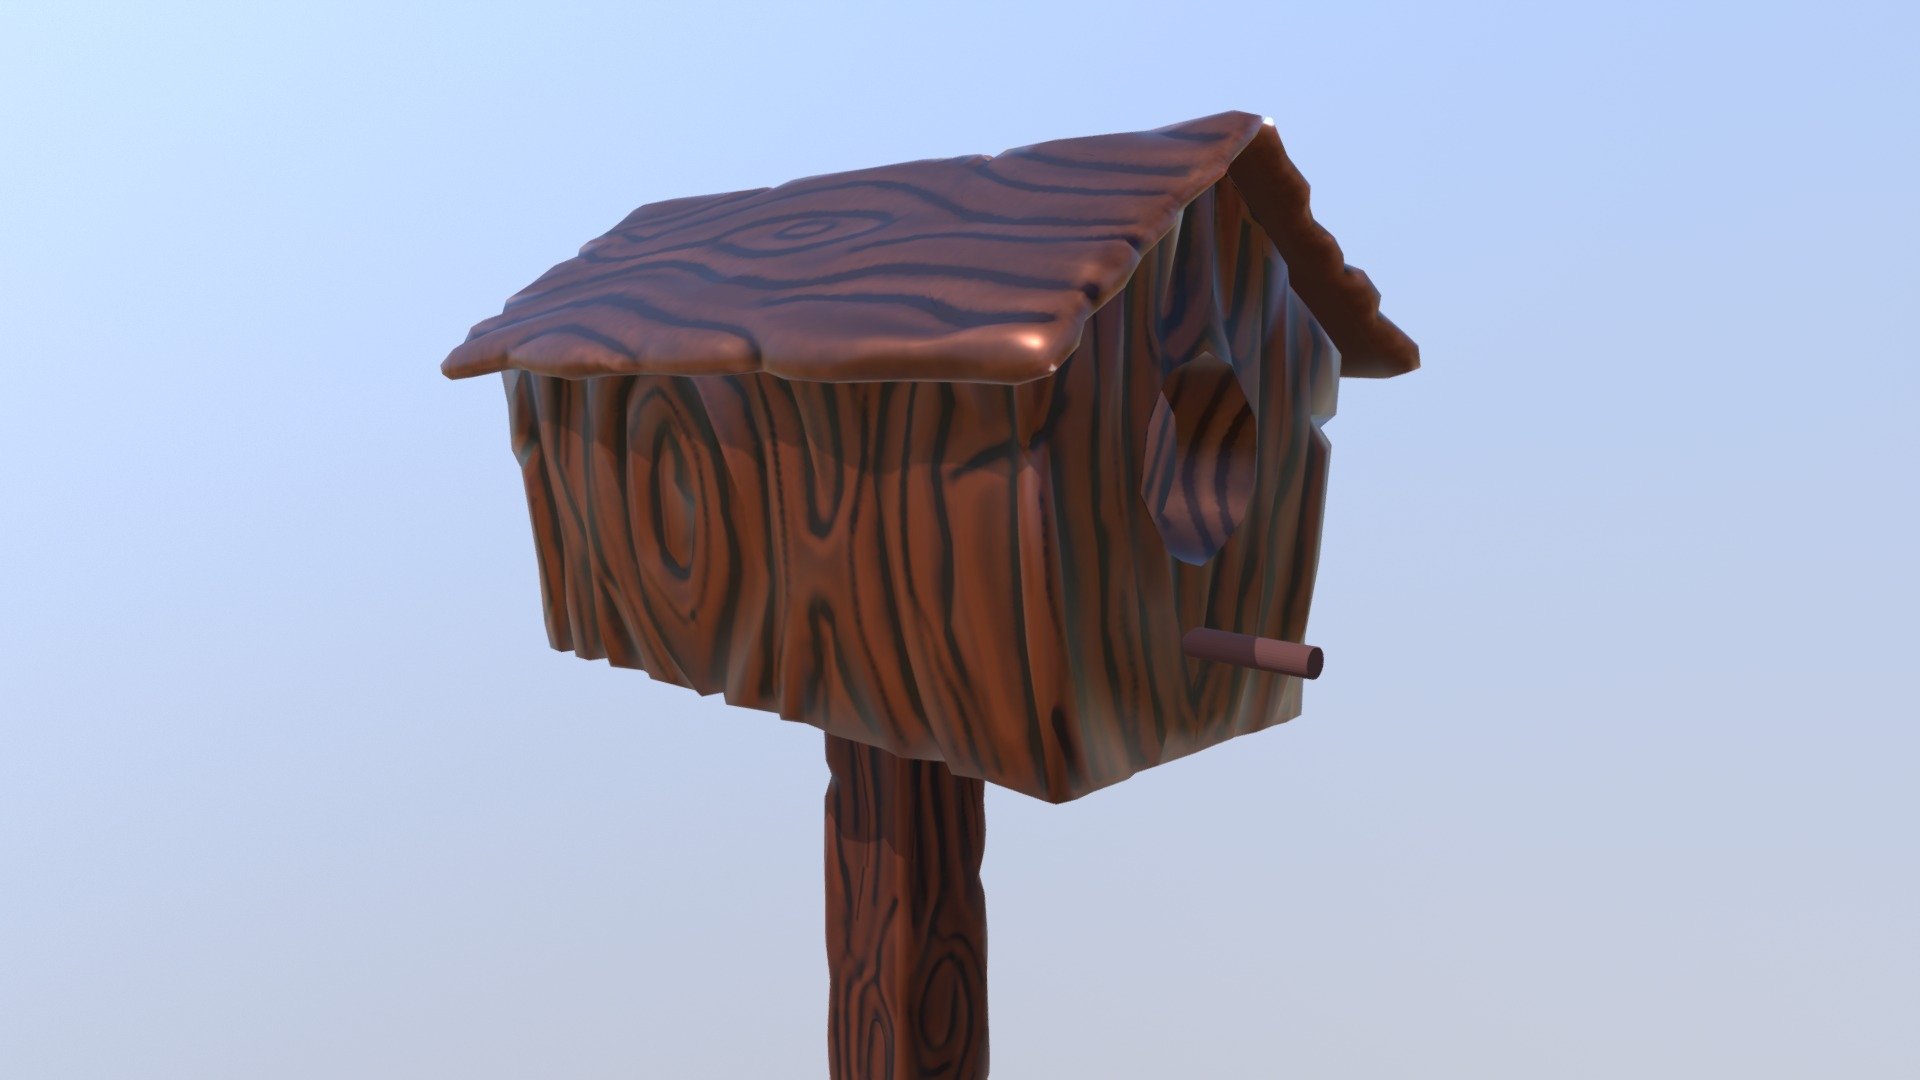 I have a cartoon birdhouse,polys are low so it can be used for games,
cheers 3d model